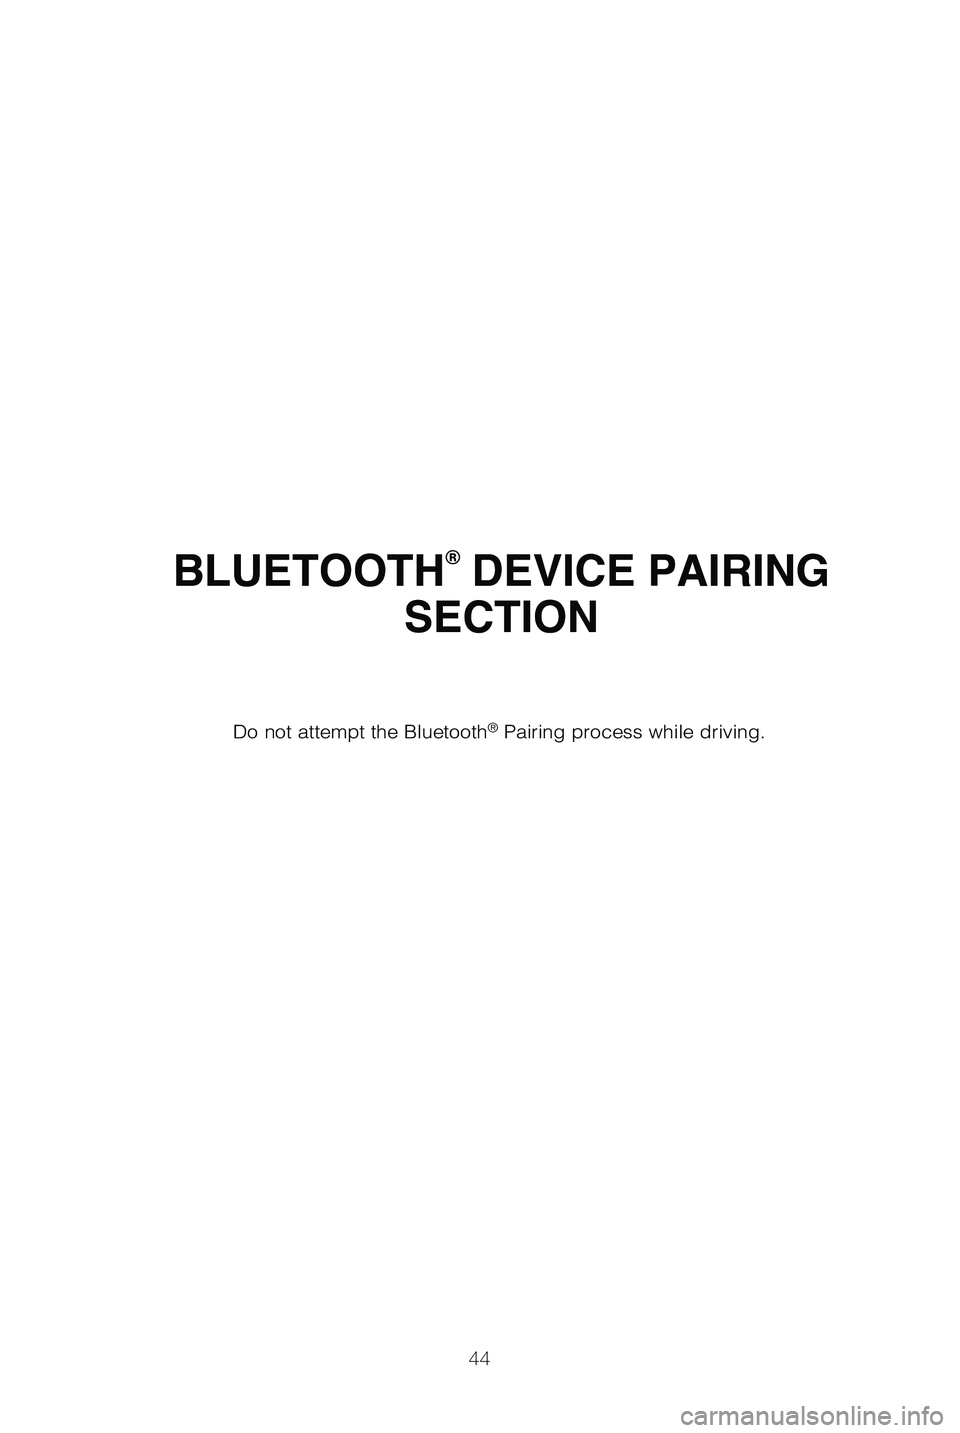 TOYOTA TUNDRA 2019   (in English) Service Manual 44
BLUETOOTH® DEVICE PAIRING 
SECTION
Do not attempt the Bluetooth® Pairing process while driving.
49087b_2019_Tundra_QRG_V2_ML_0714.indd   447/17/18   3:19 PM 